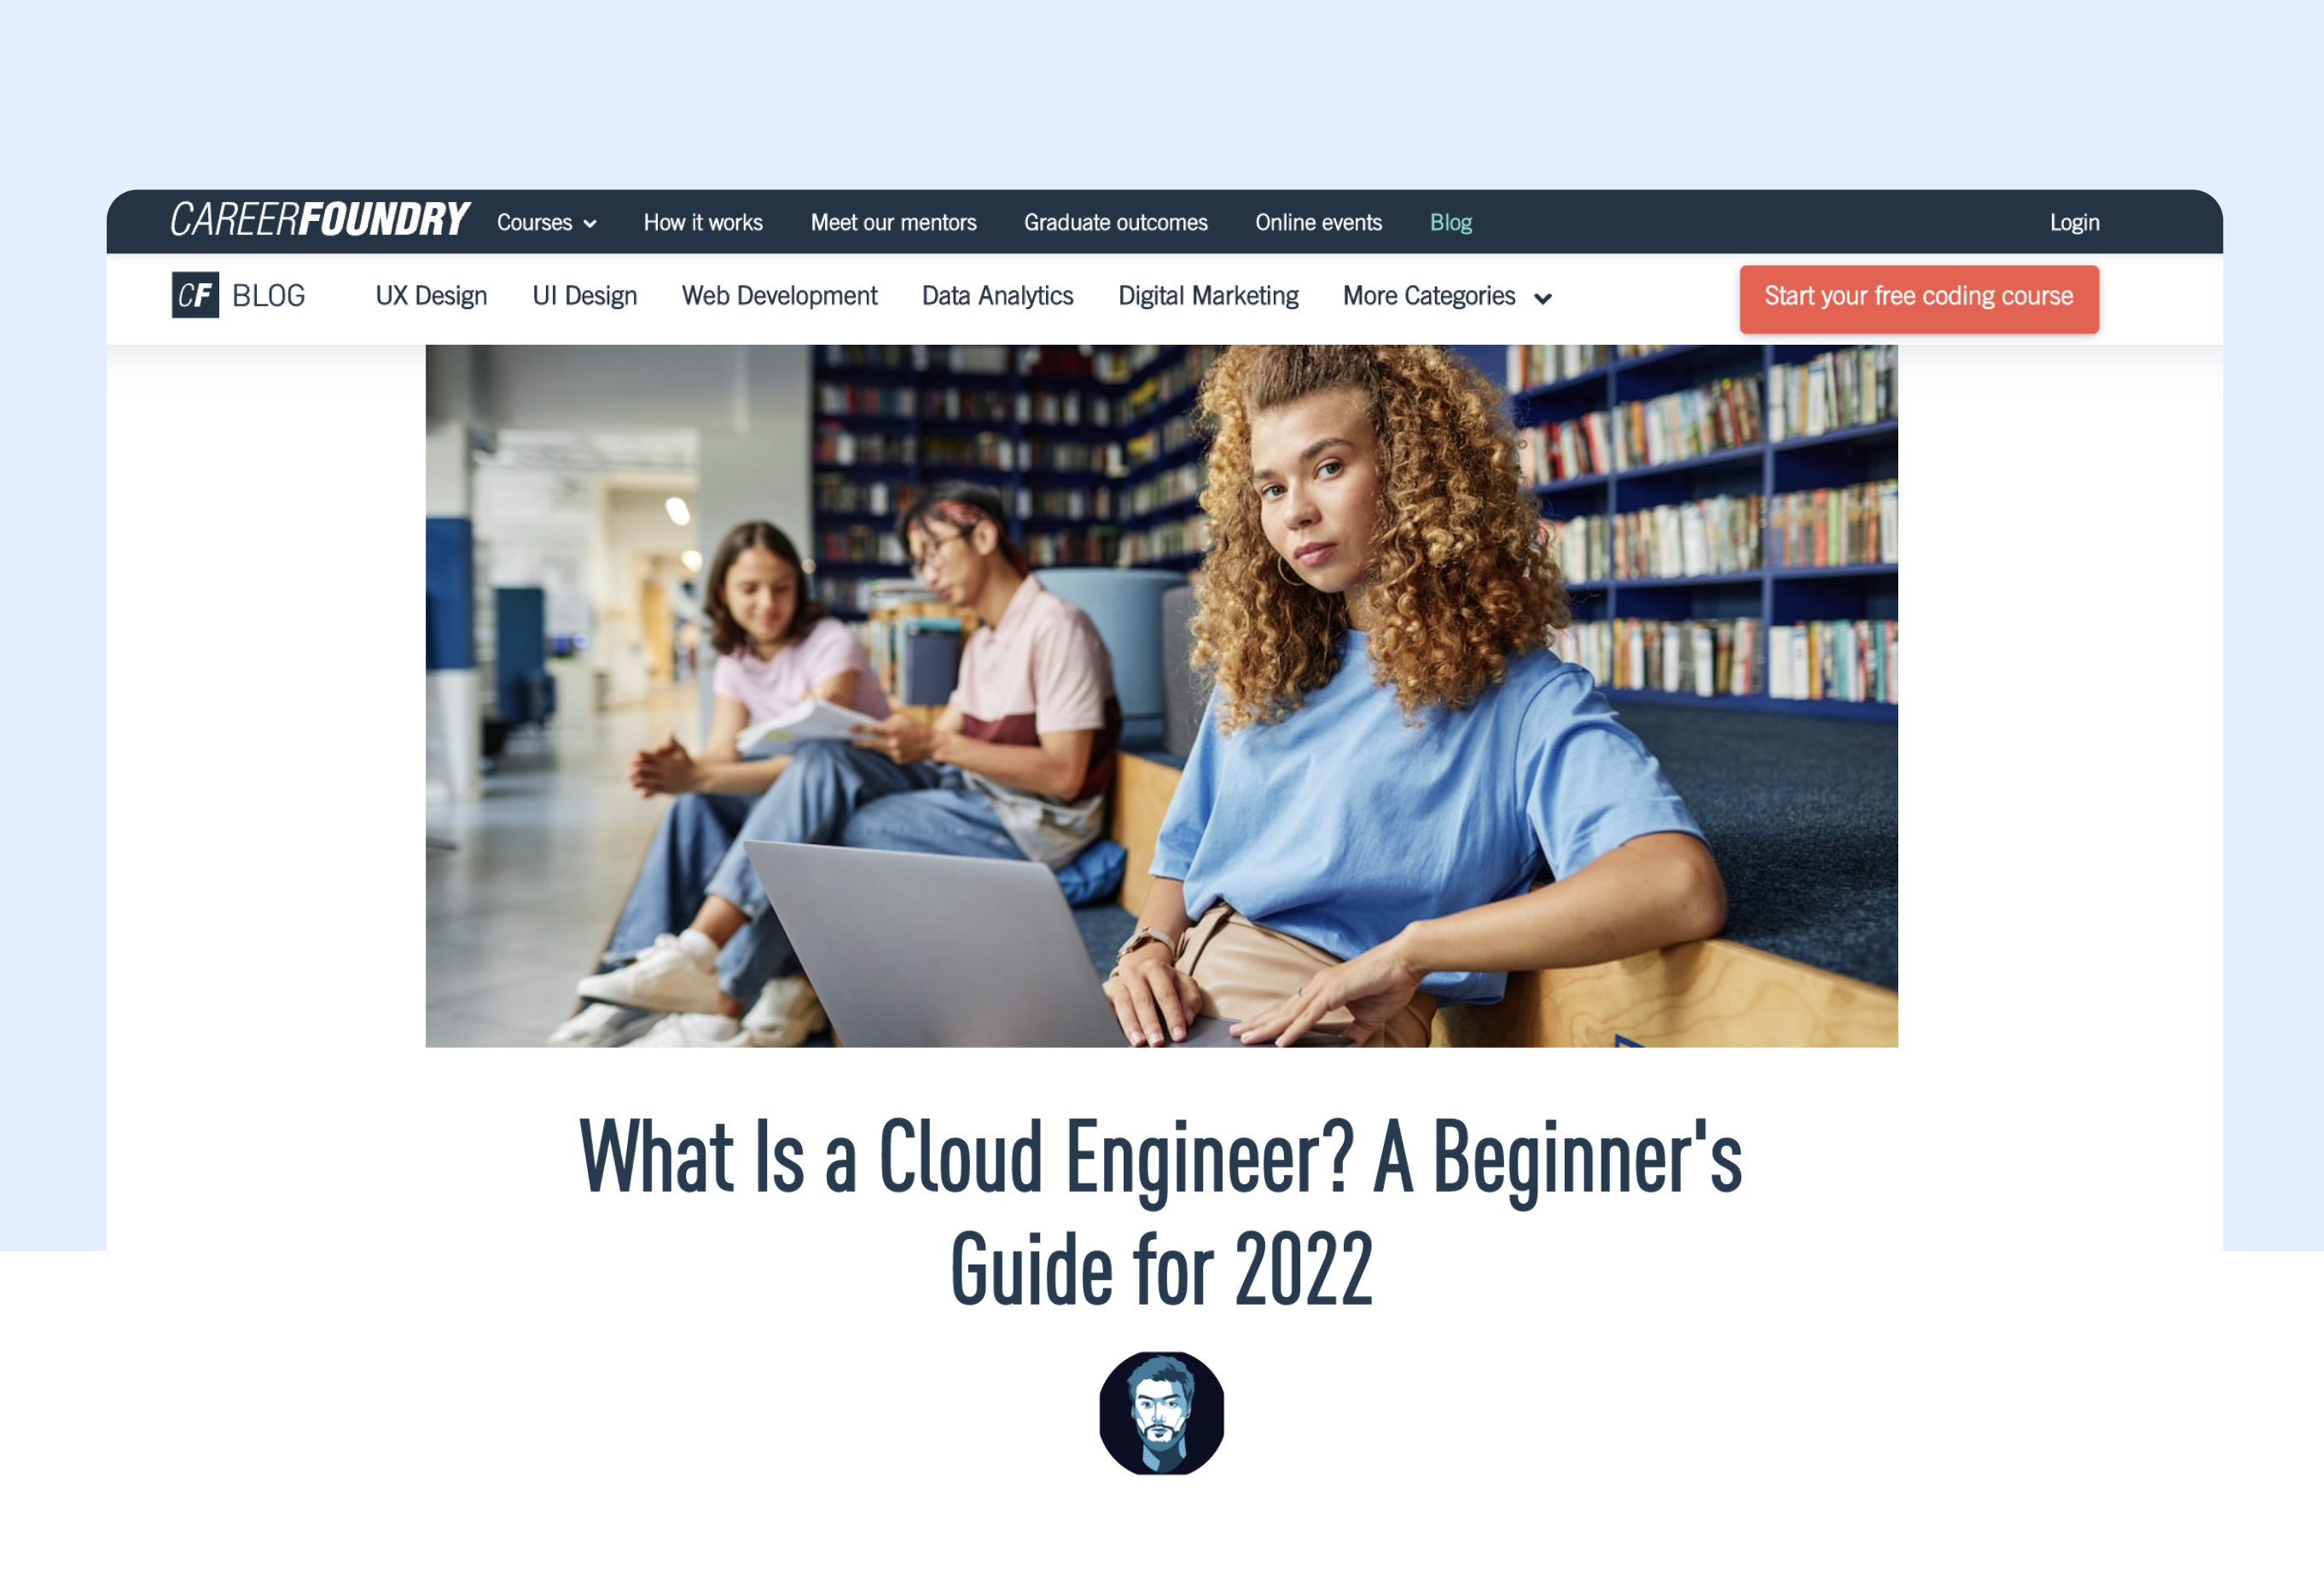 What is a Cloud Engineer? A Beginner's Guide